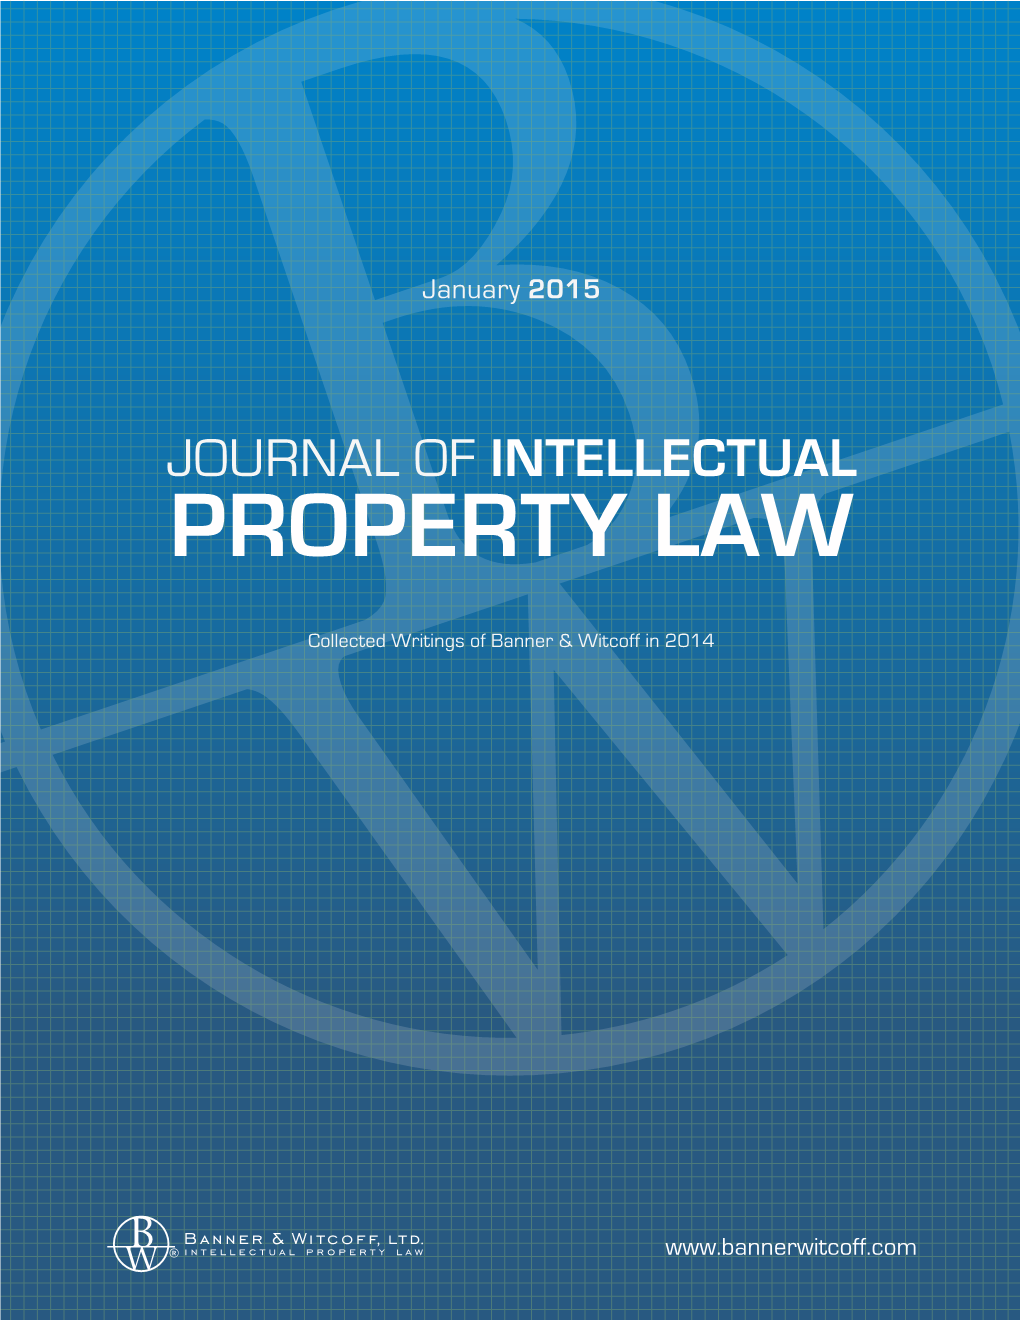 Journal of Intellectual Property Law